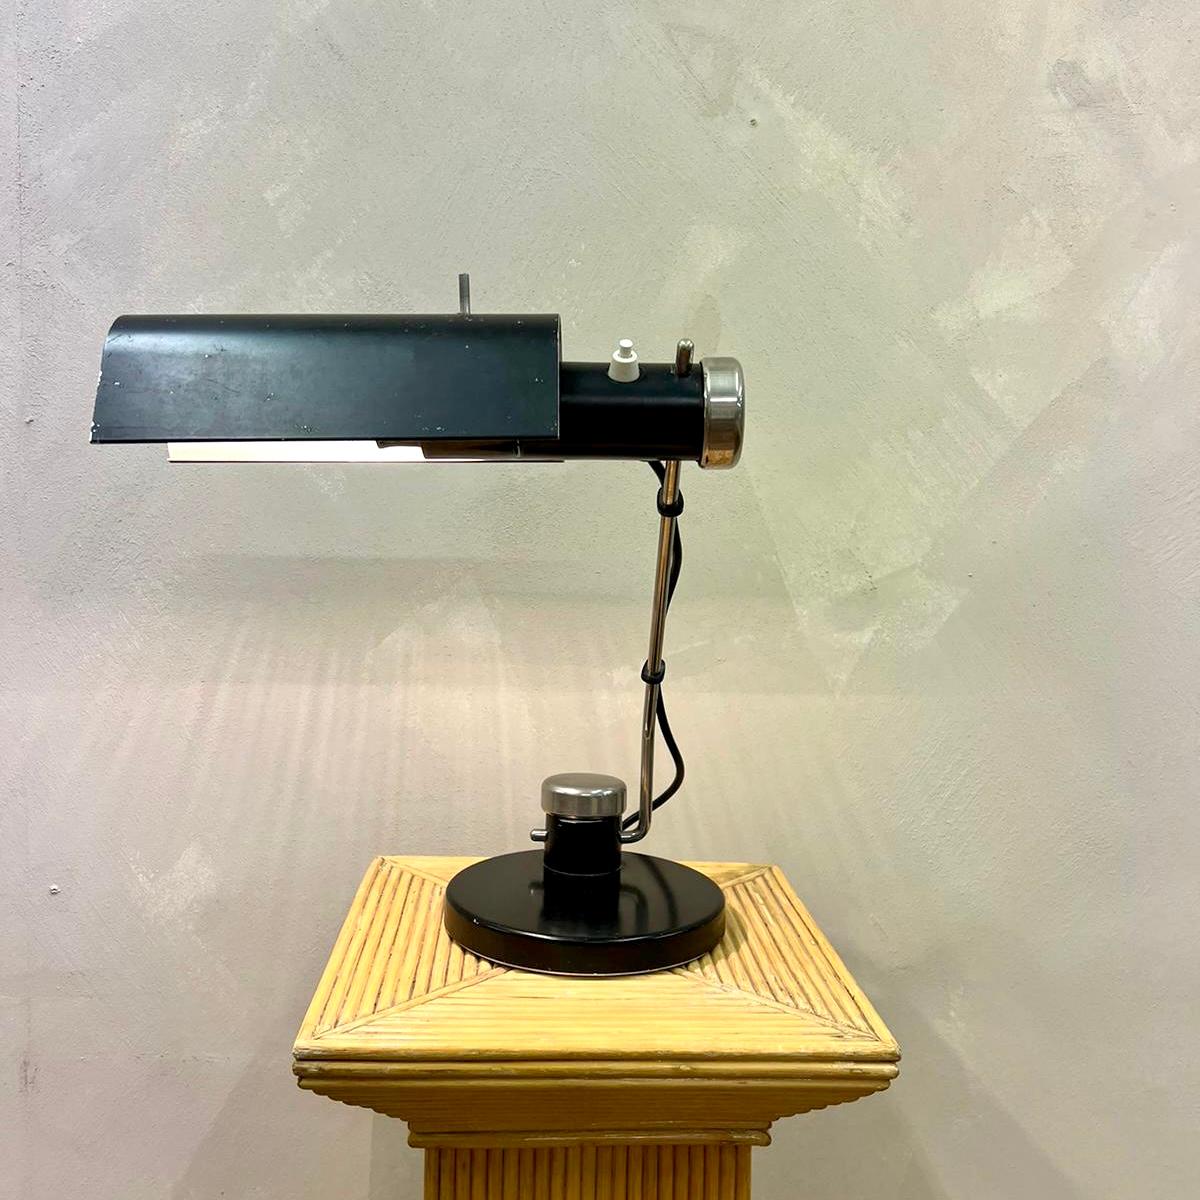 Oskar Immerschied TK501 Desk Lamp
circa 1960
Wired & Pat tested
The TH 501 was designed by Oskar Immerschied in the mid-1960s and produced by the PGH Metalldrücker Halle (from 1972 VEB Metalldrücker Halle).
The lamp impresses with its functional